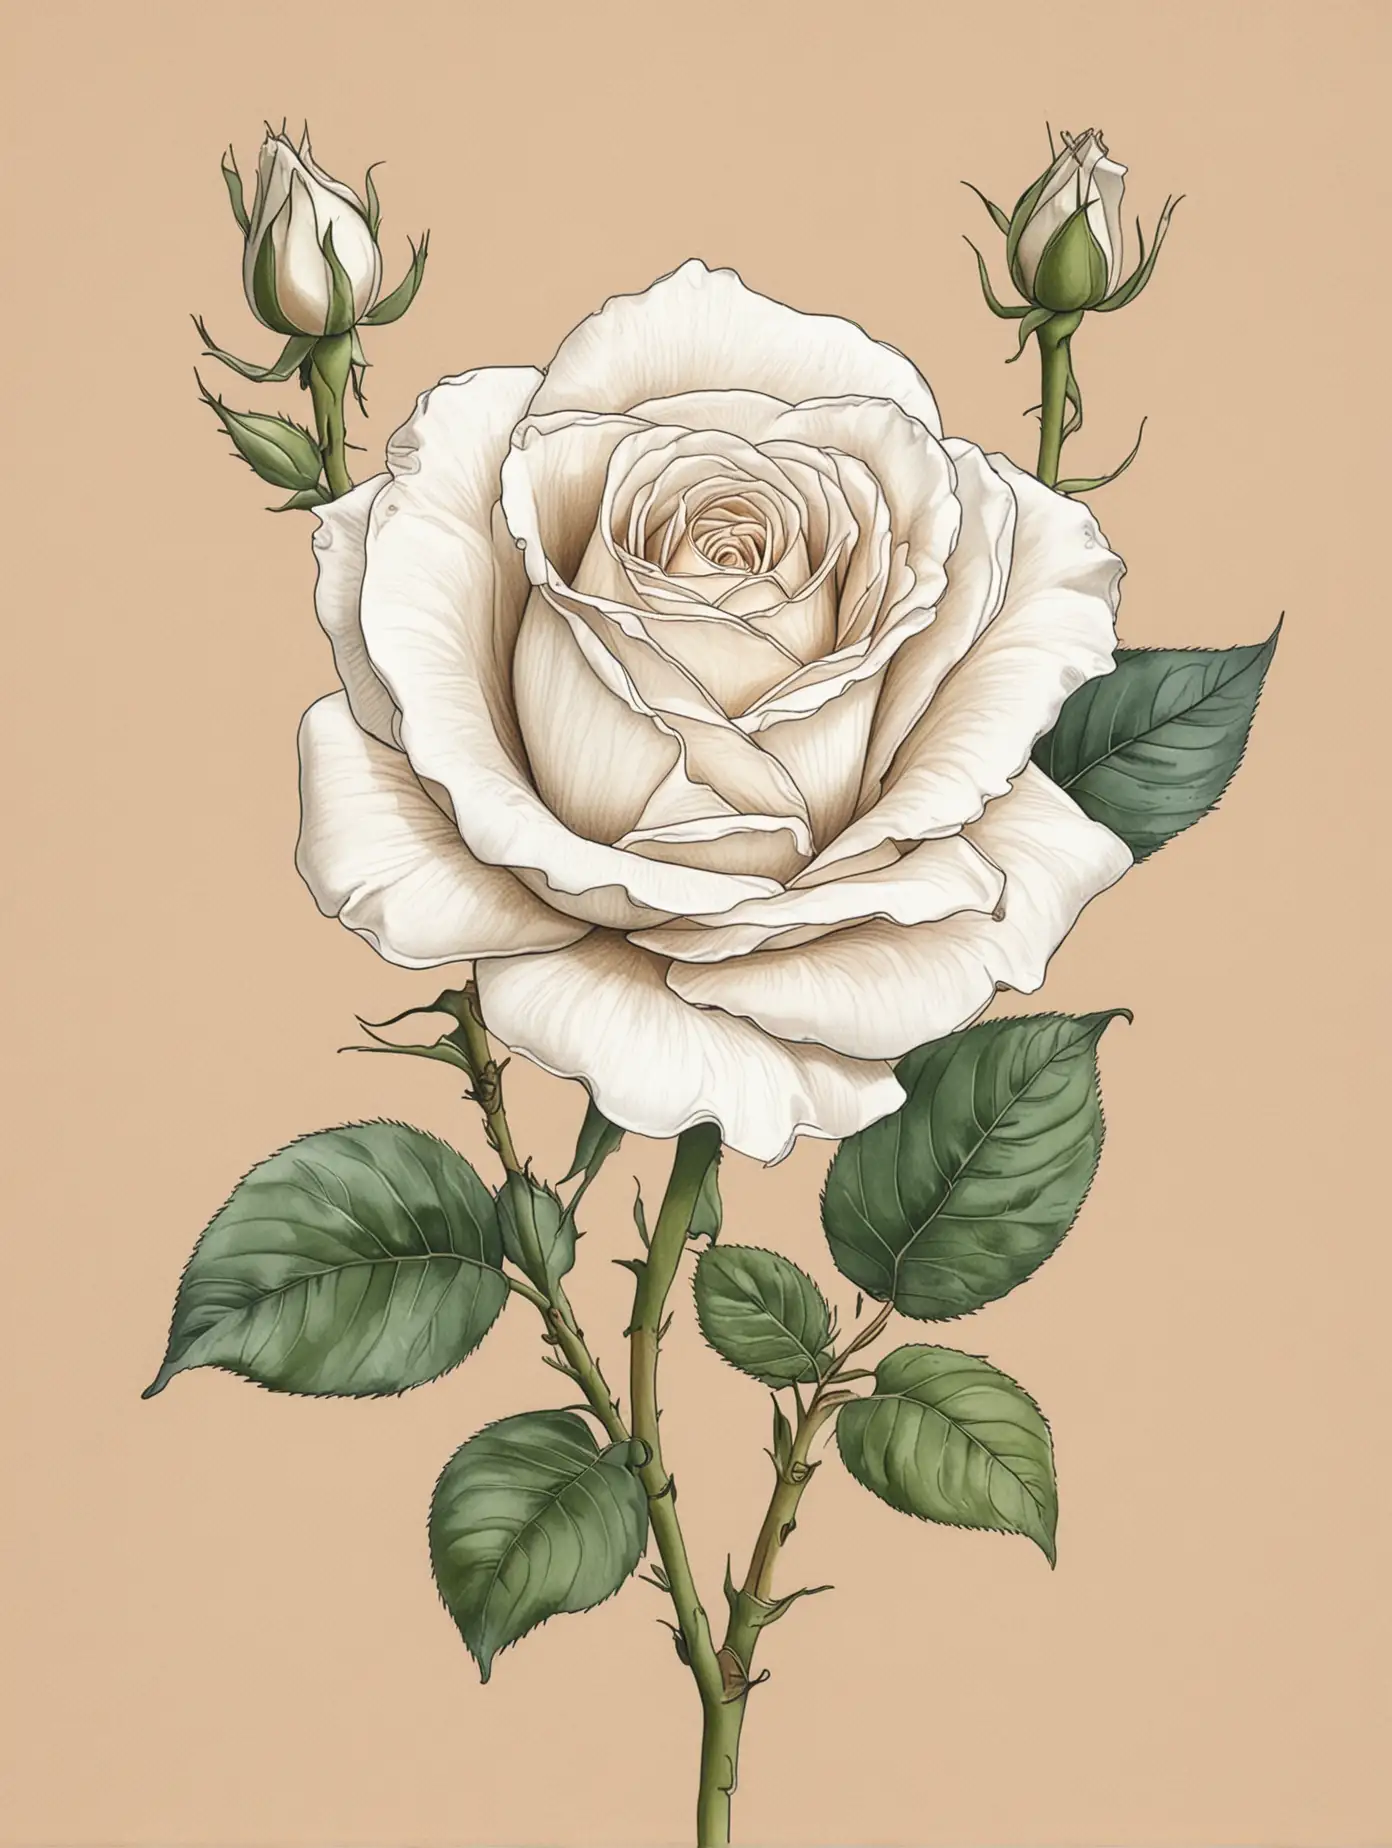 Elegant Line Drawing of a White Rose in Audubon Style